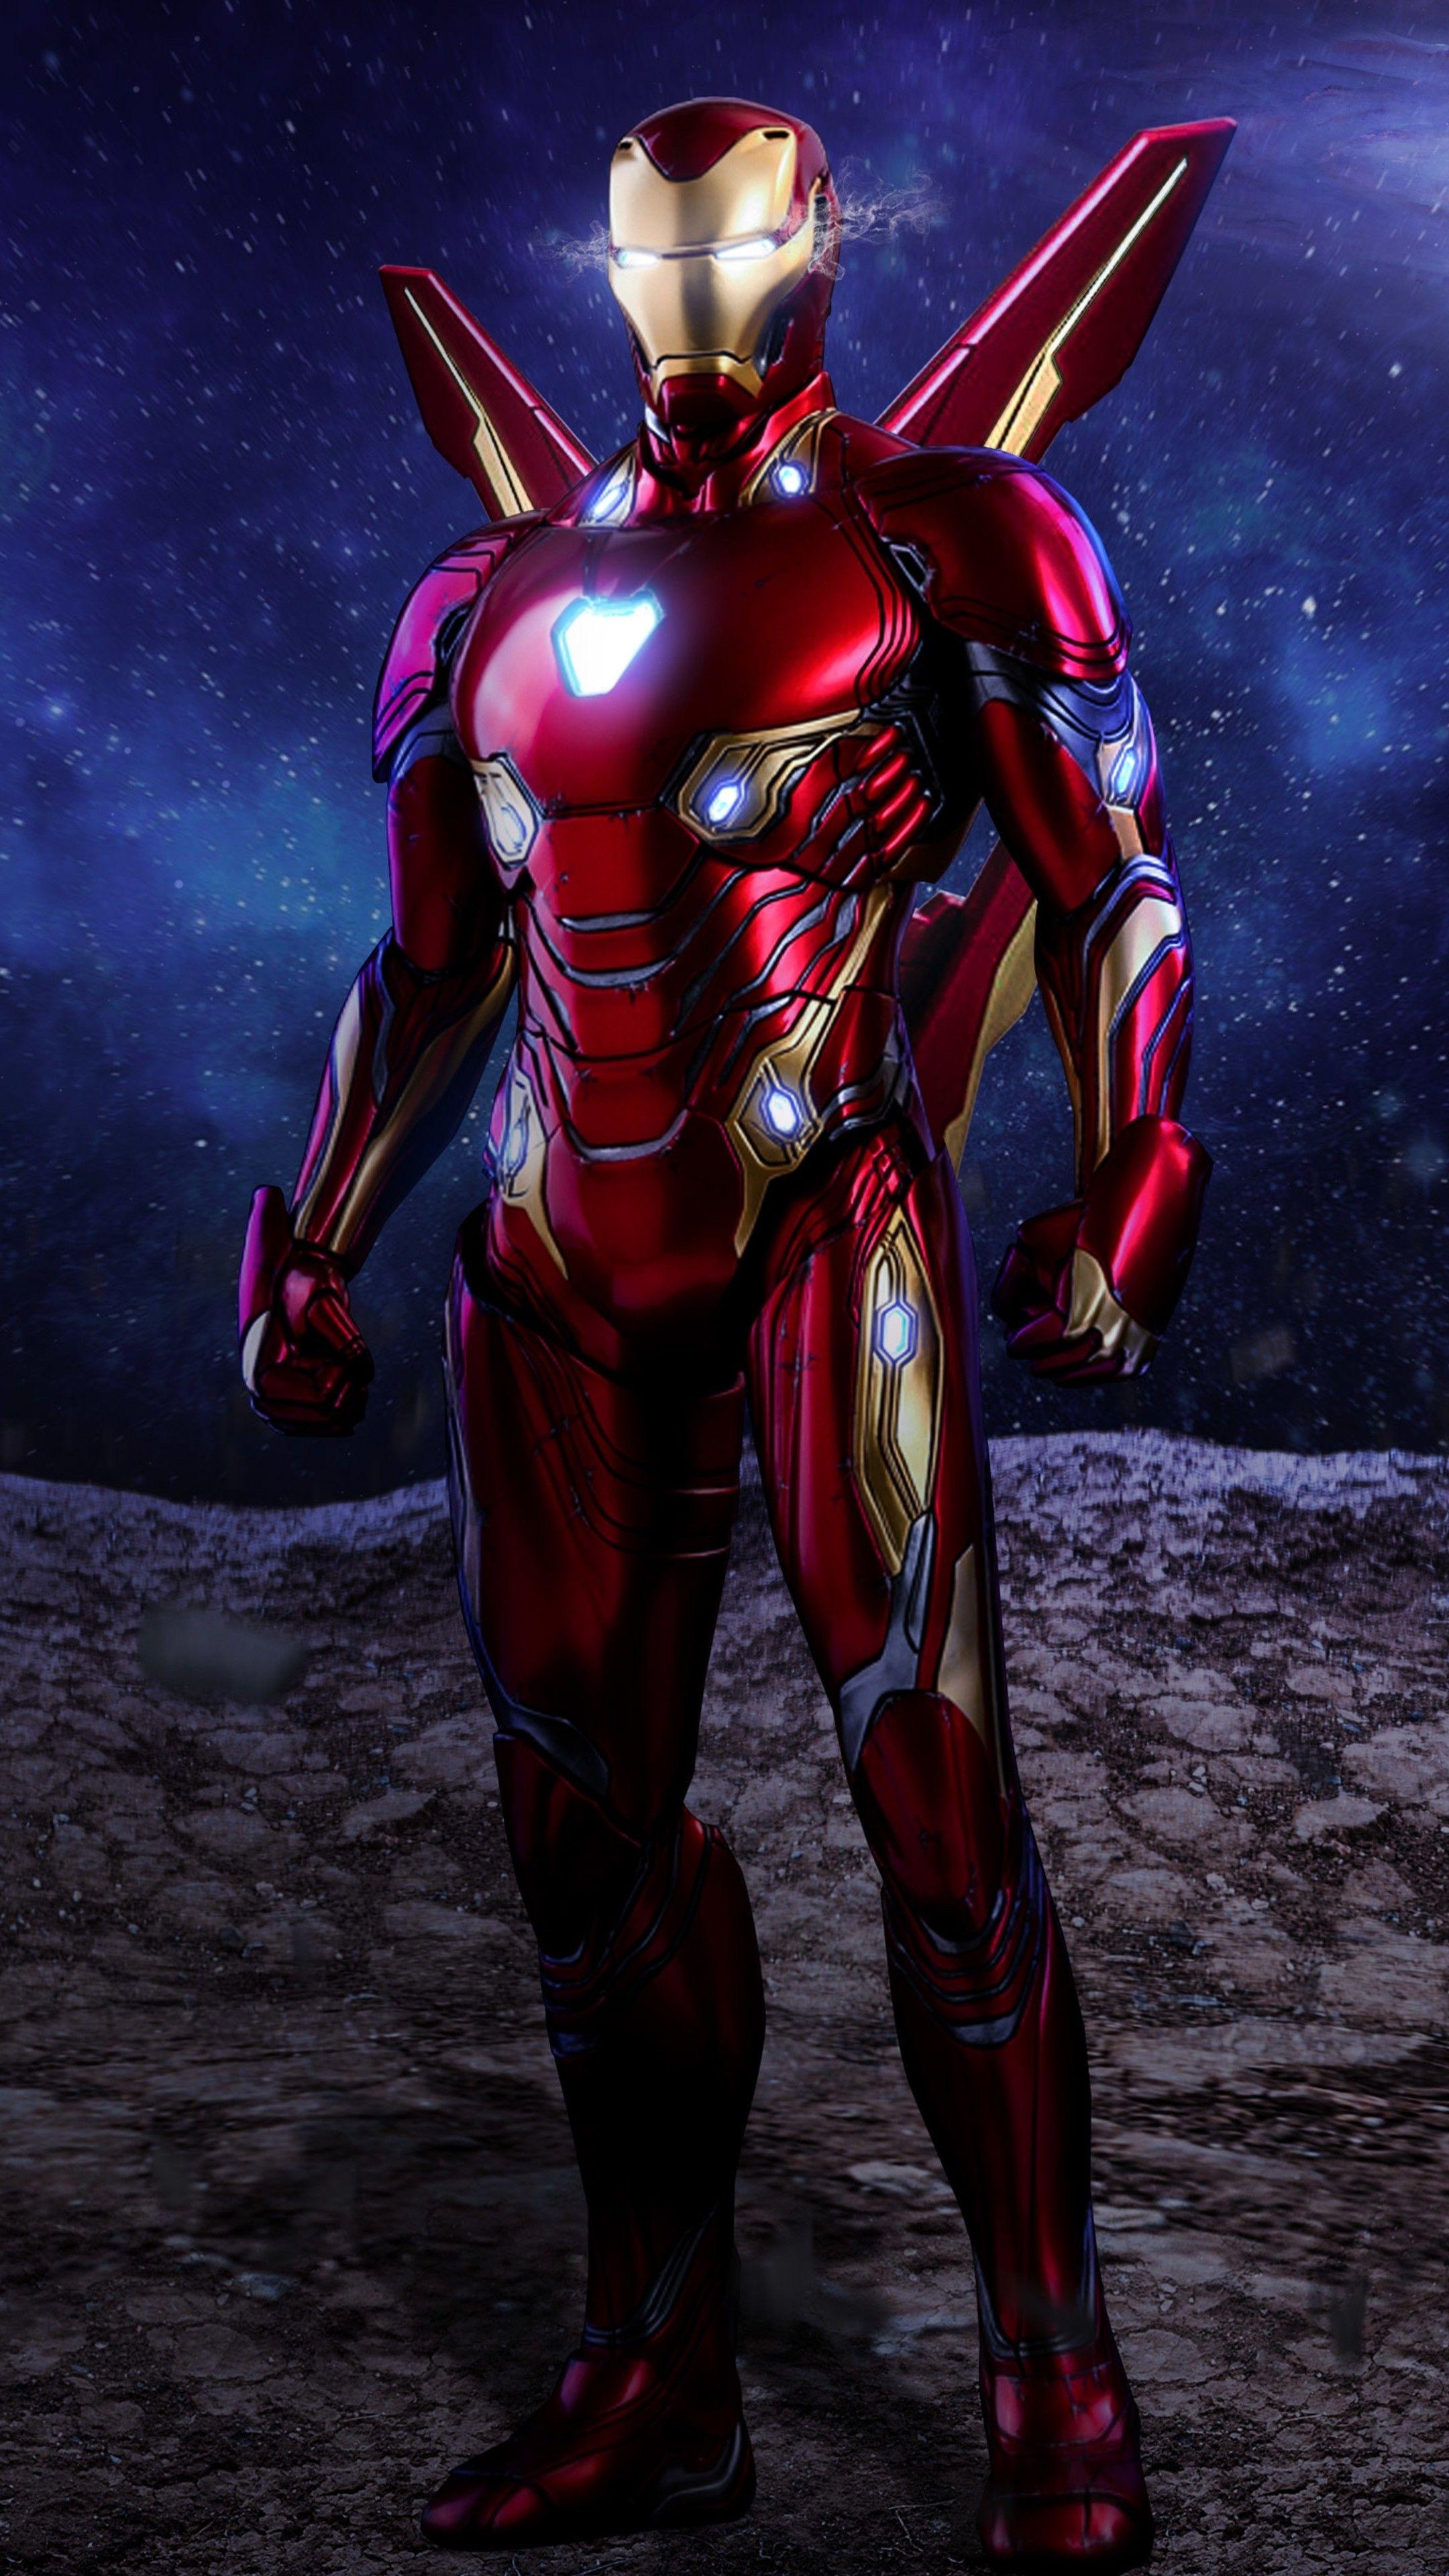 Iron Man Suits Wallpapers Top Free Iron Man Suits Backgrounds Wallpaperaccess 0752